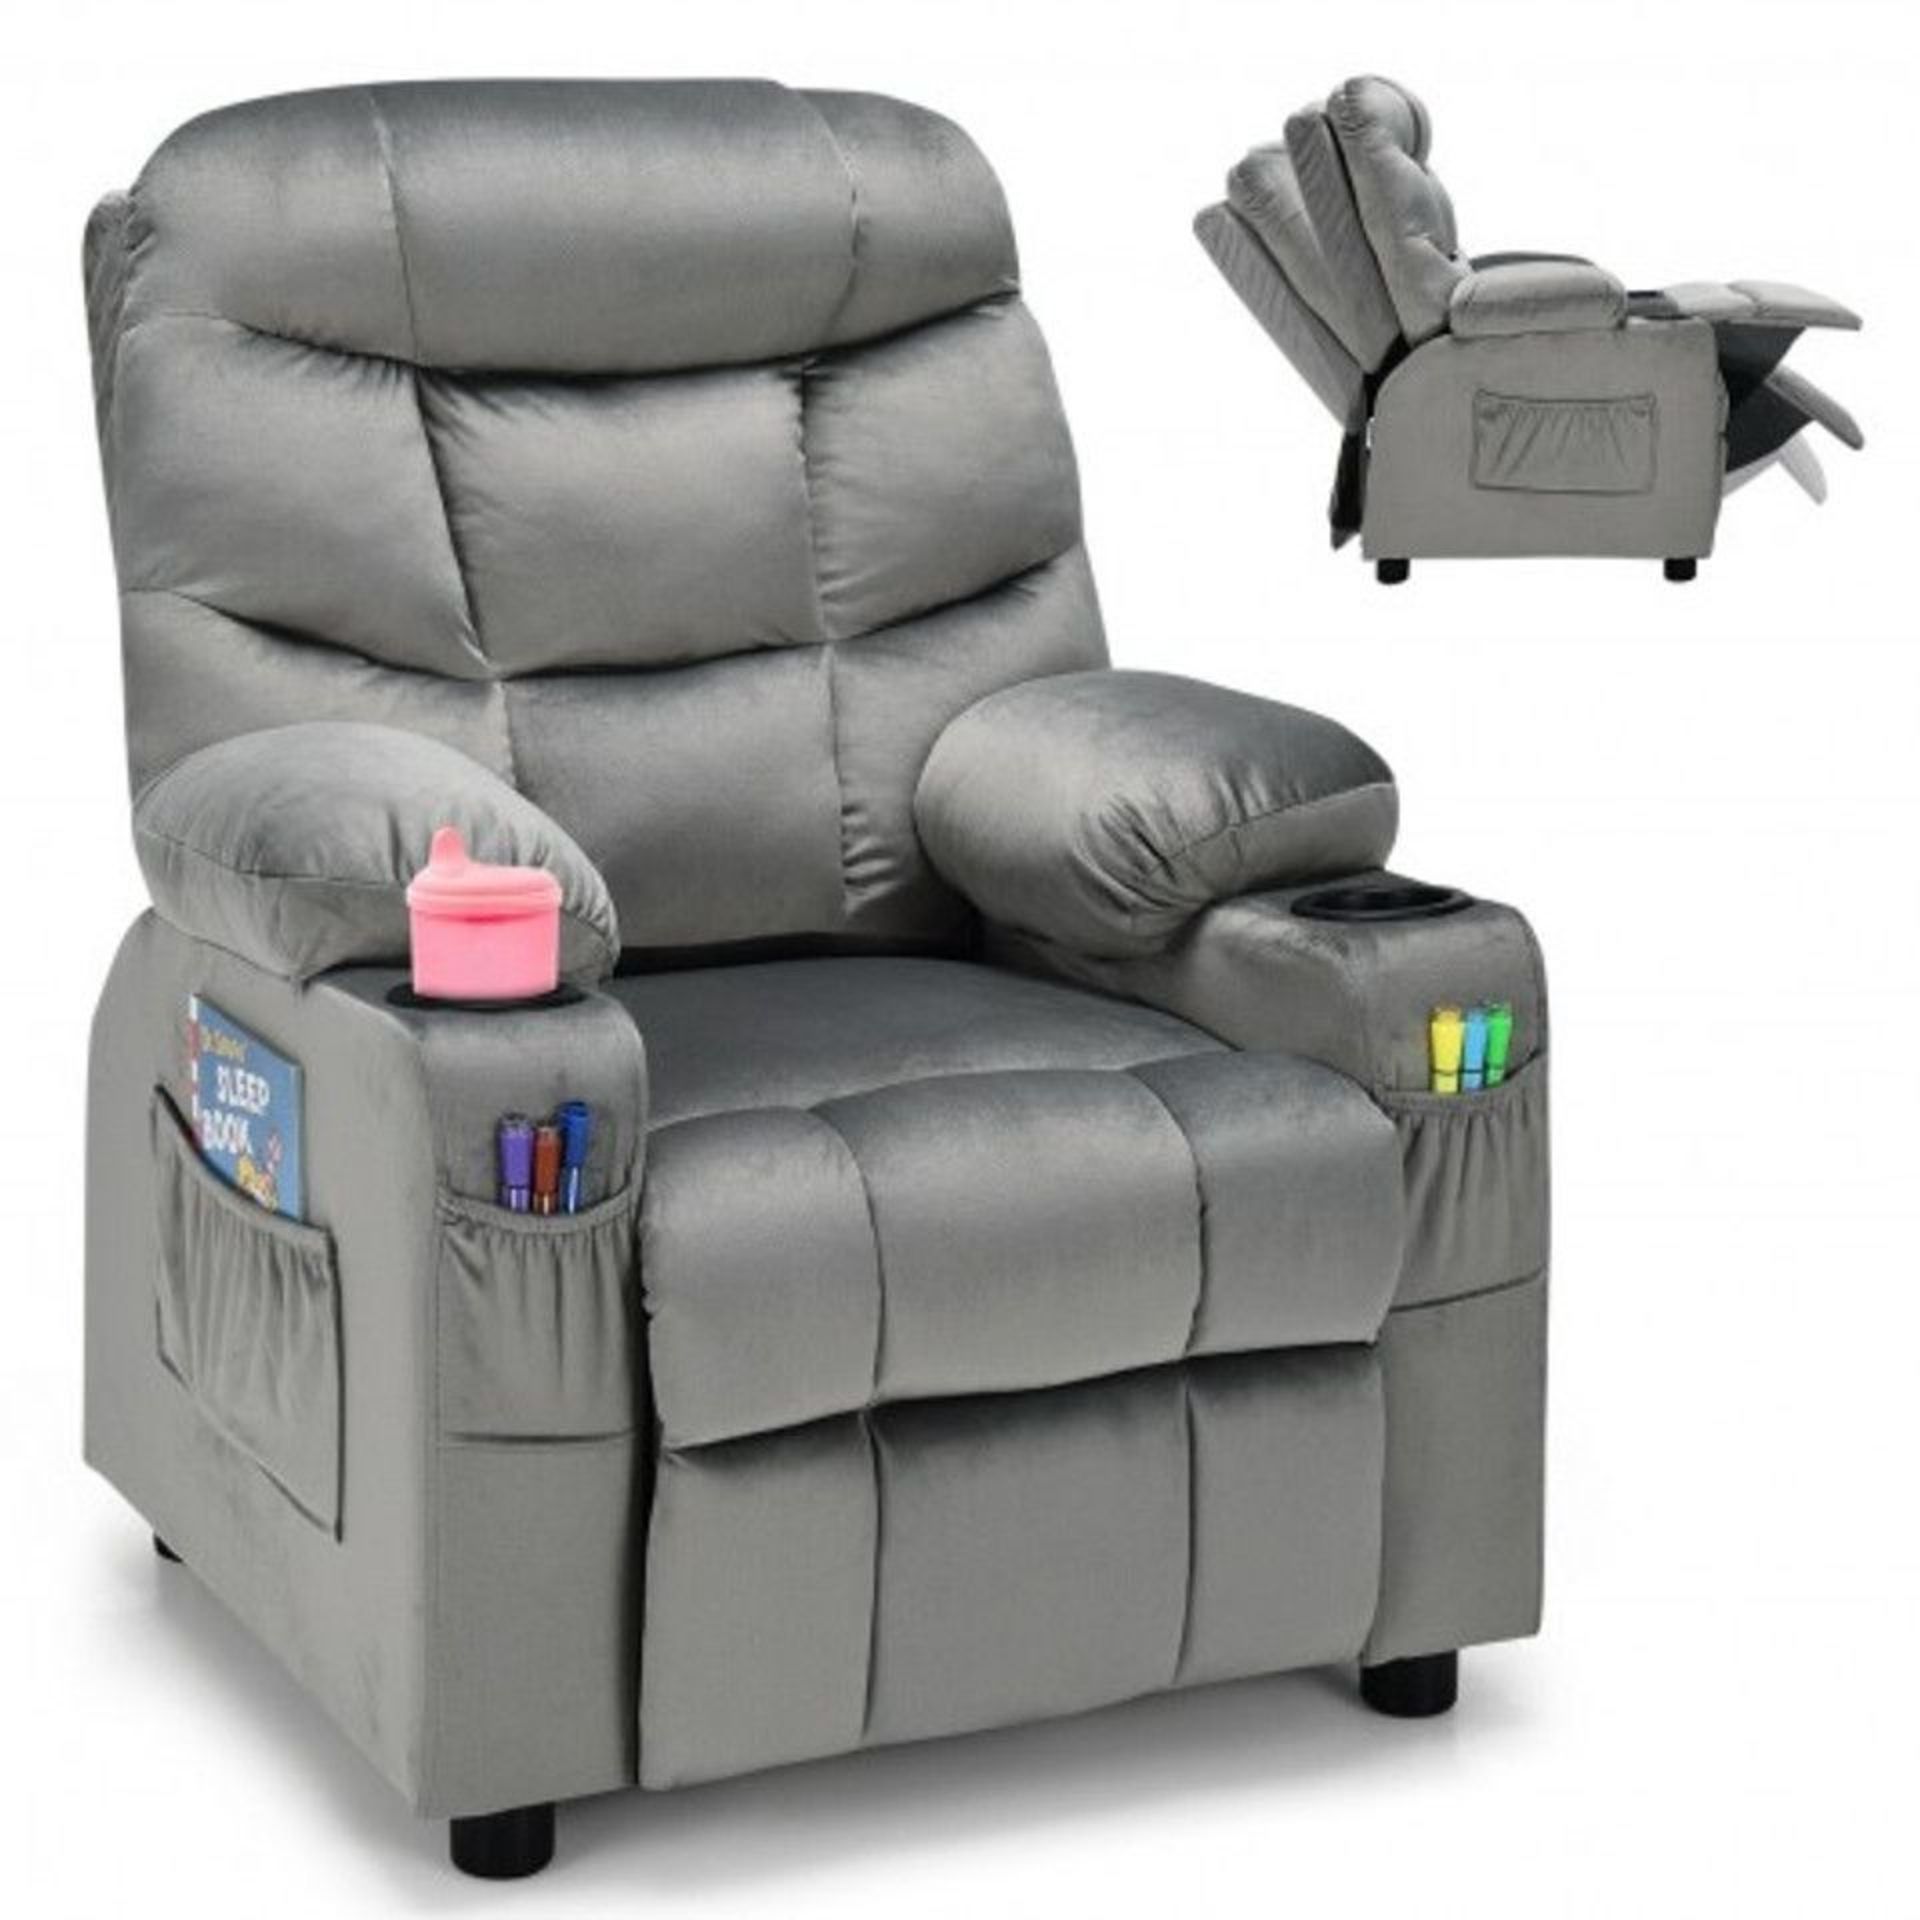 Adjustable Lounge Chair With Footrest And Side Pockets Children. - ER53. The kid's recliner chair